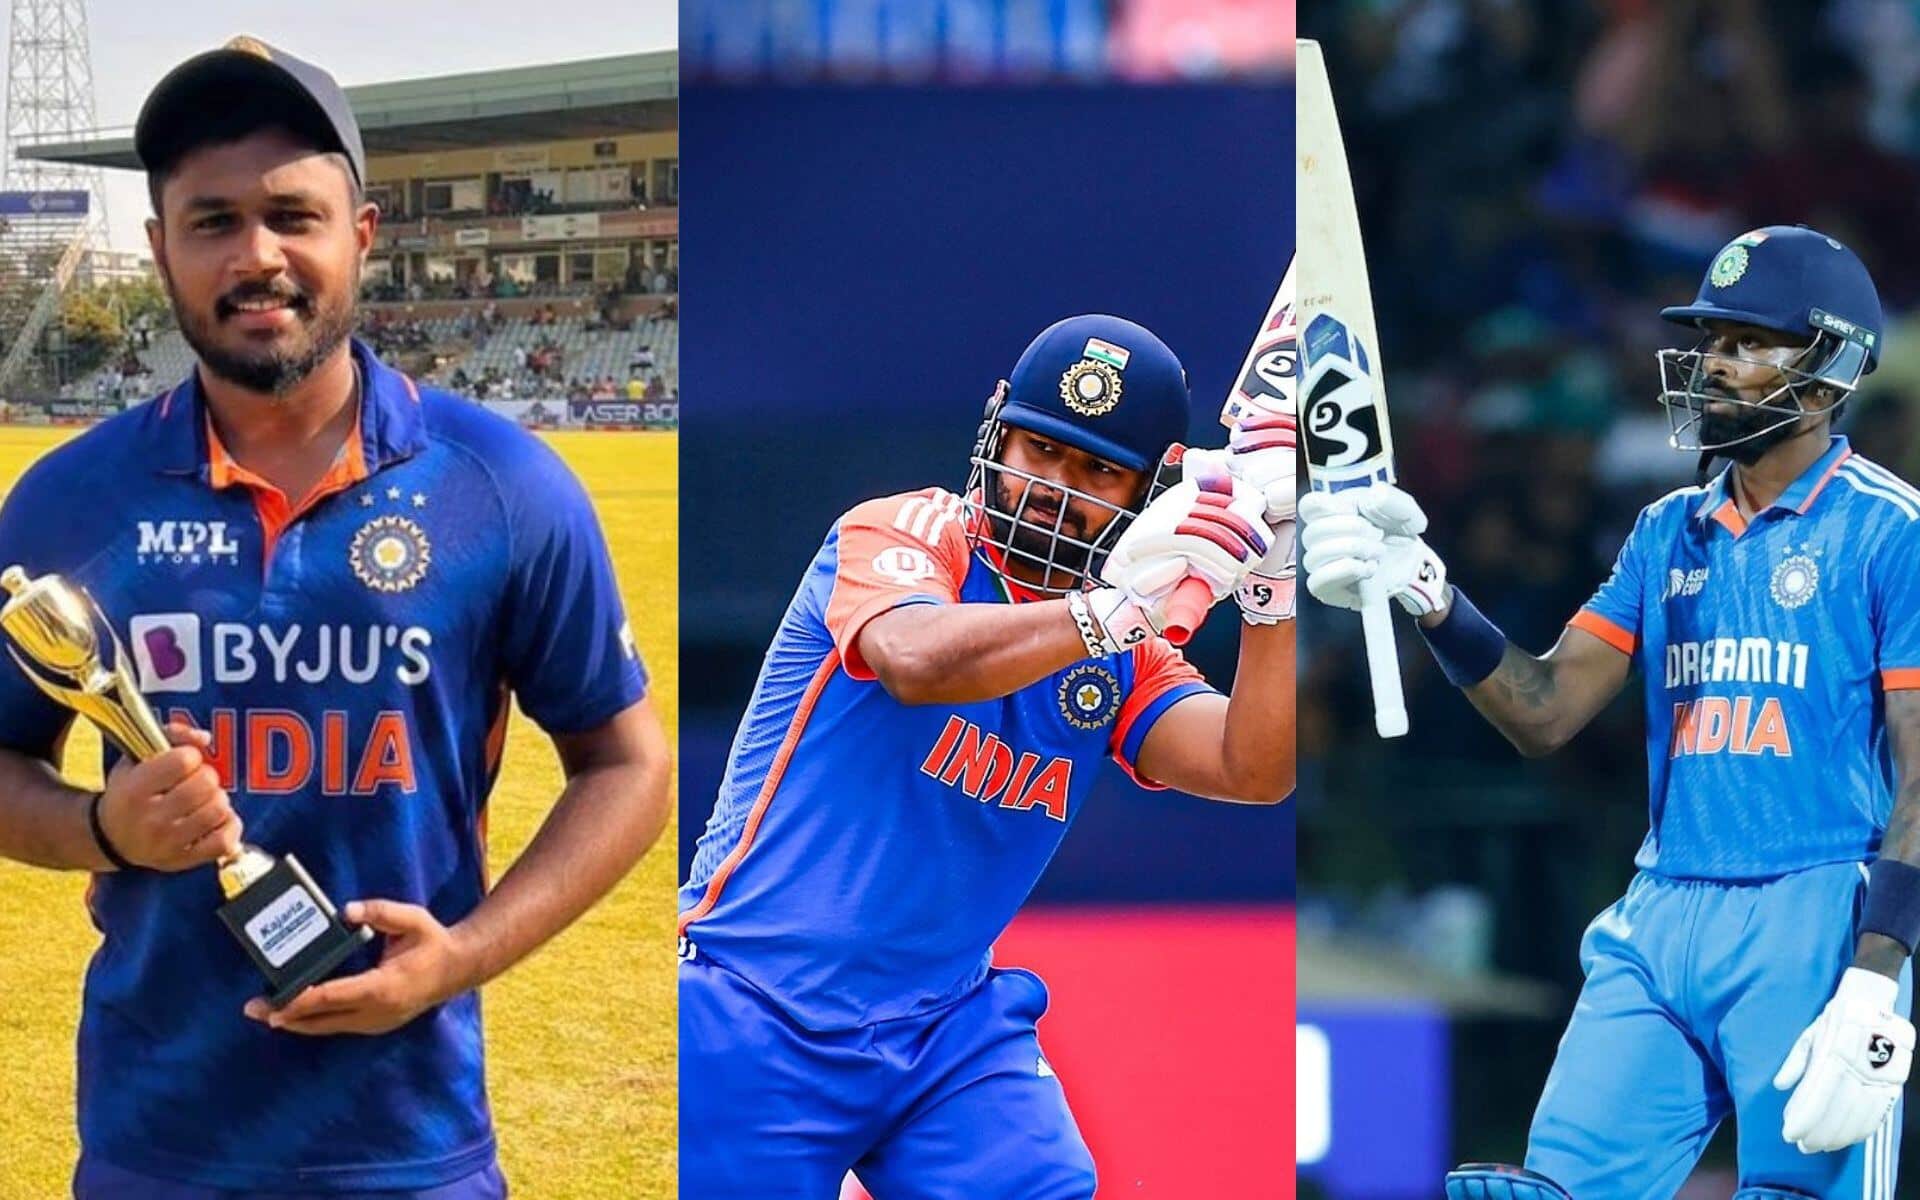 No Samson; SKY To Keep Pant, Hardik, Rinku In Middle; India's Probable XI For 1st T20I Vs SL